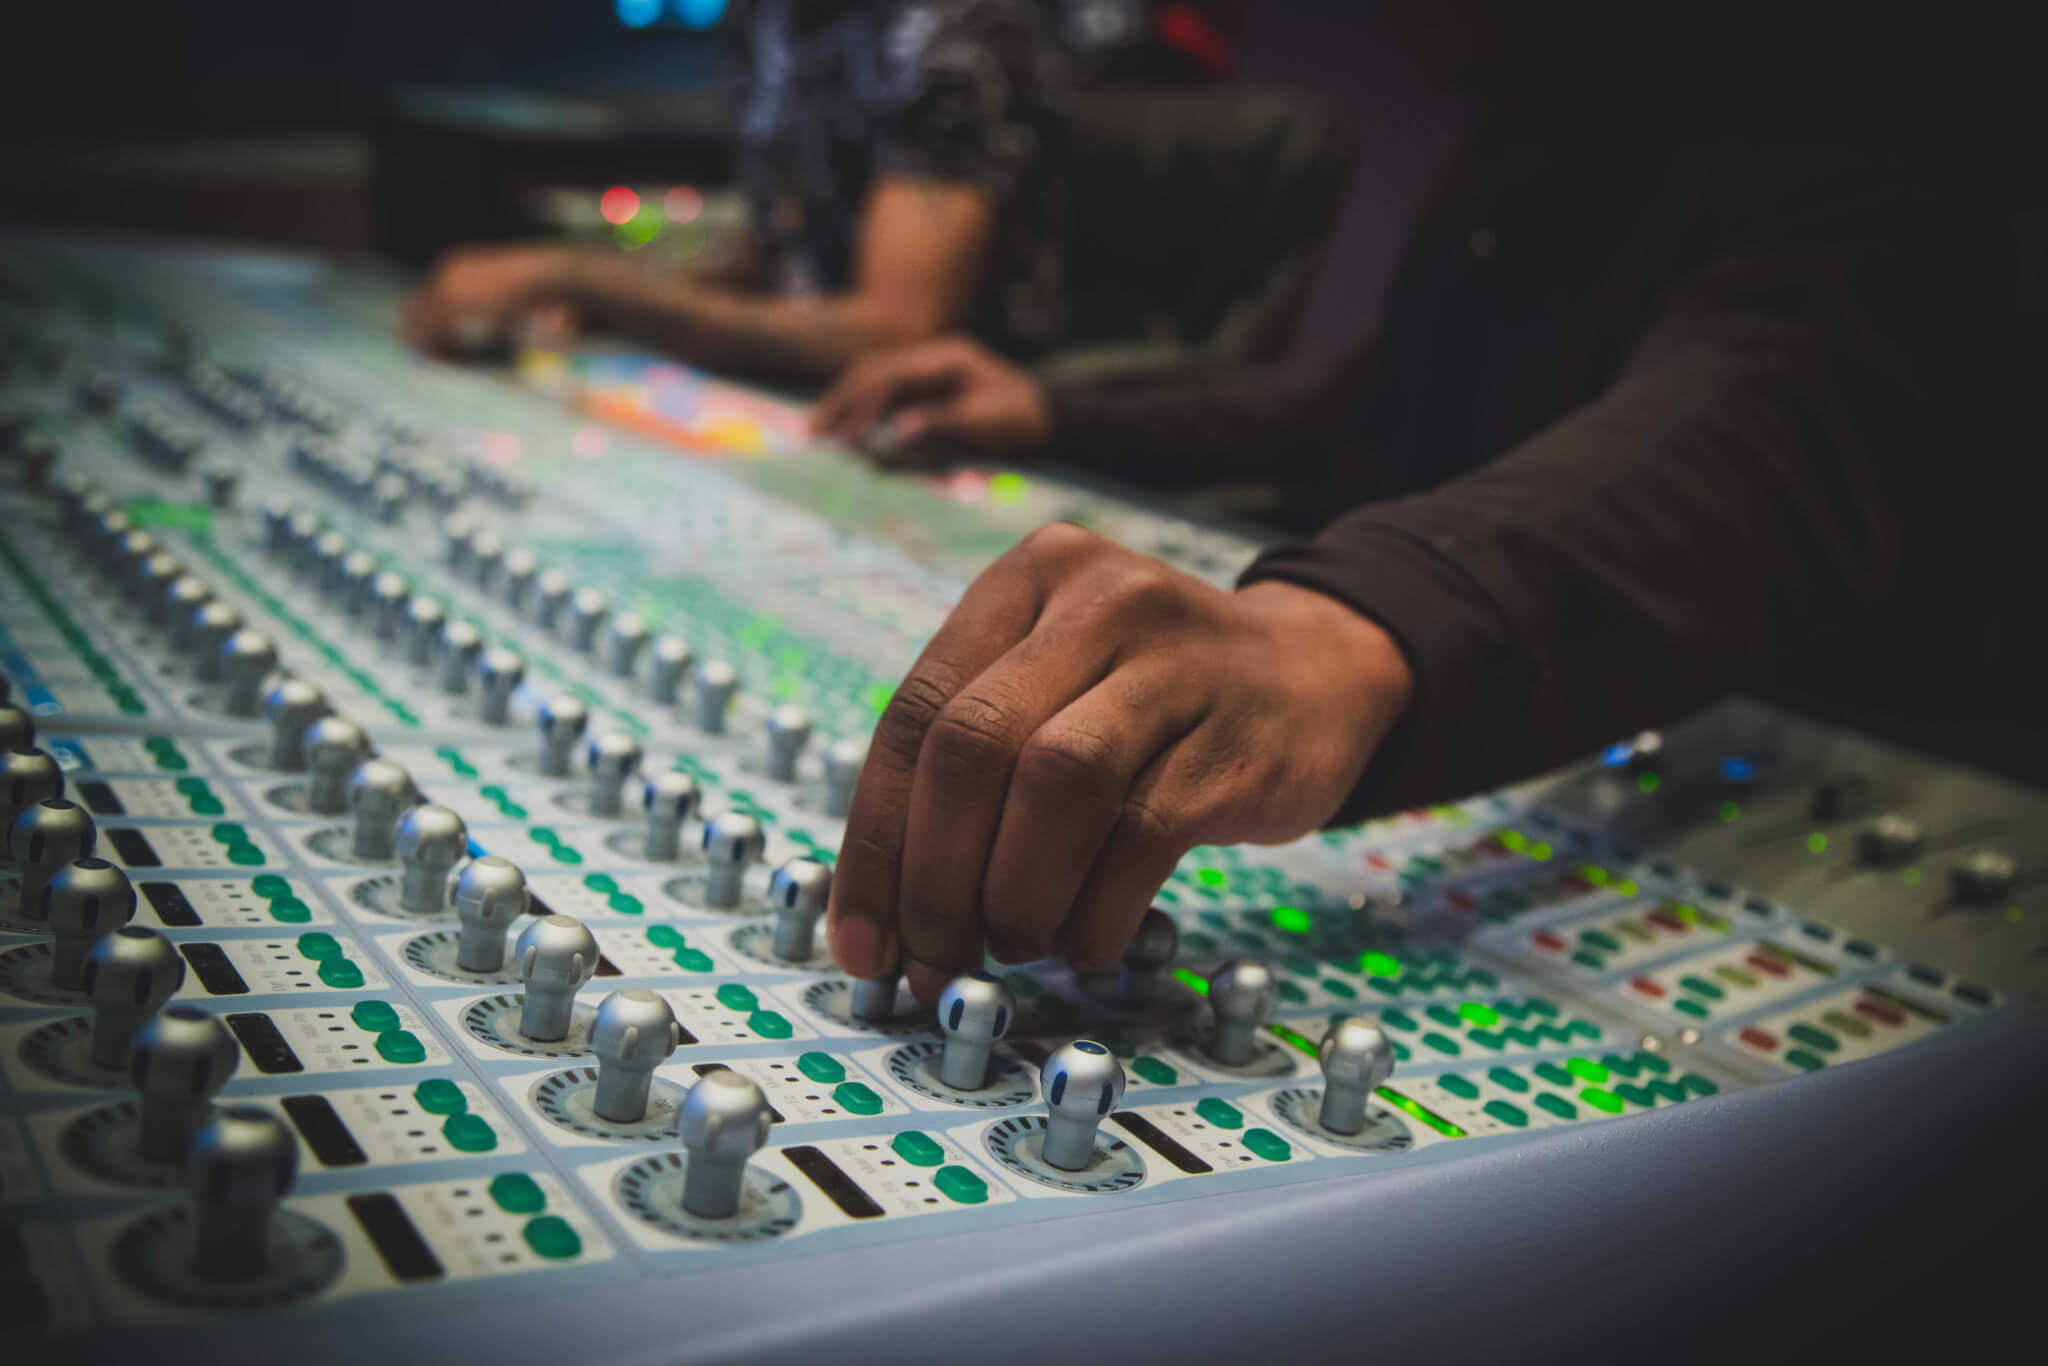 SAE Audio Students Hands Close up